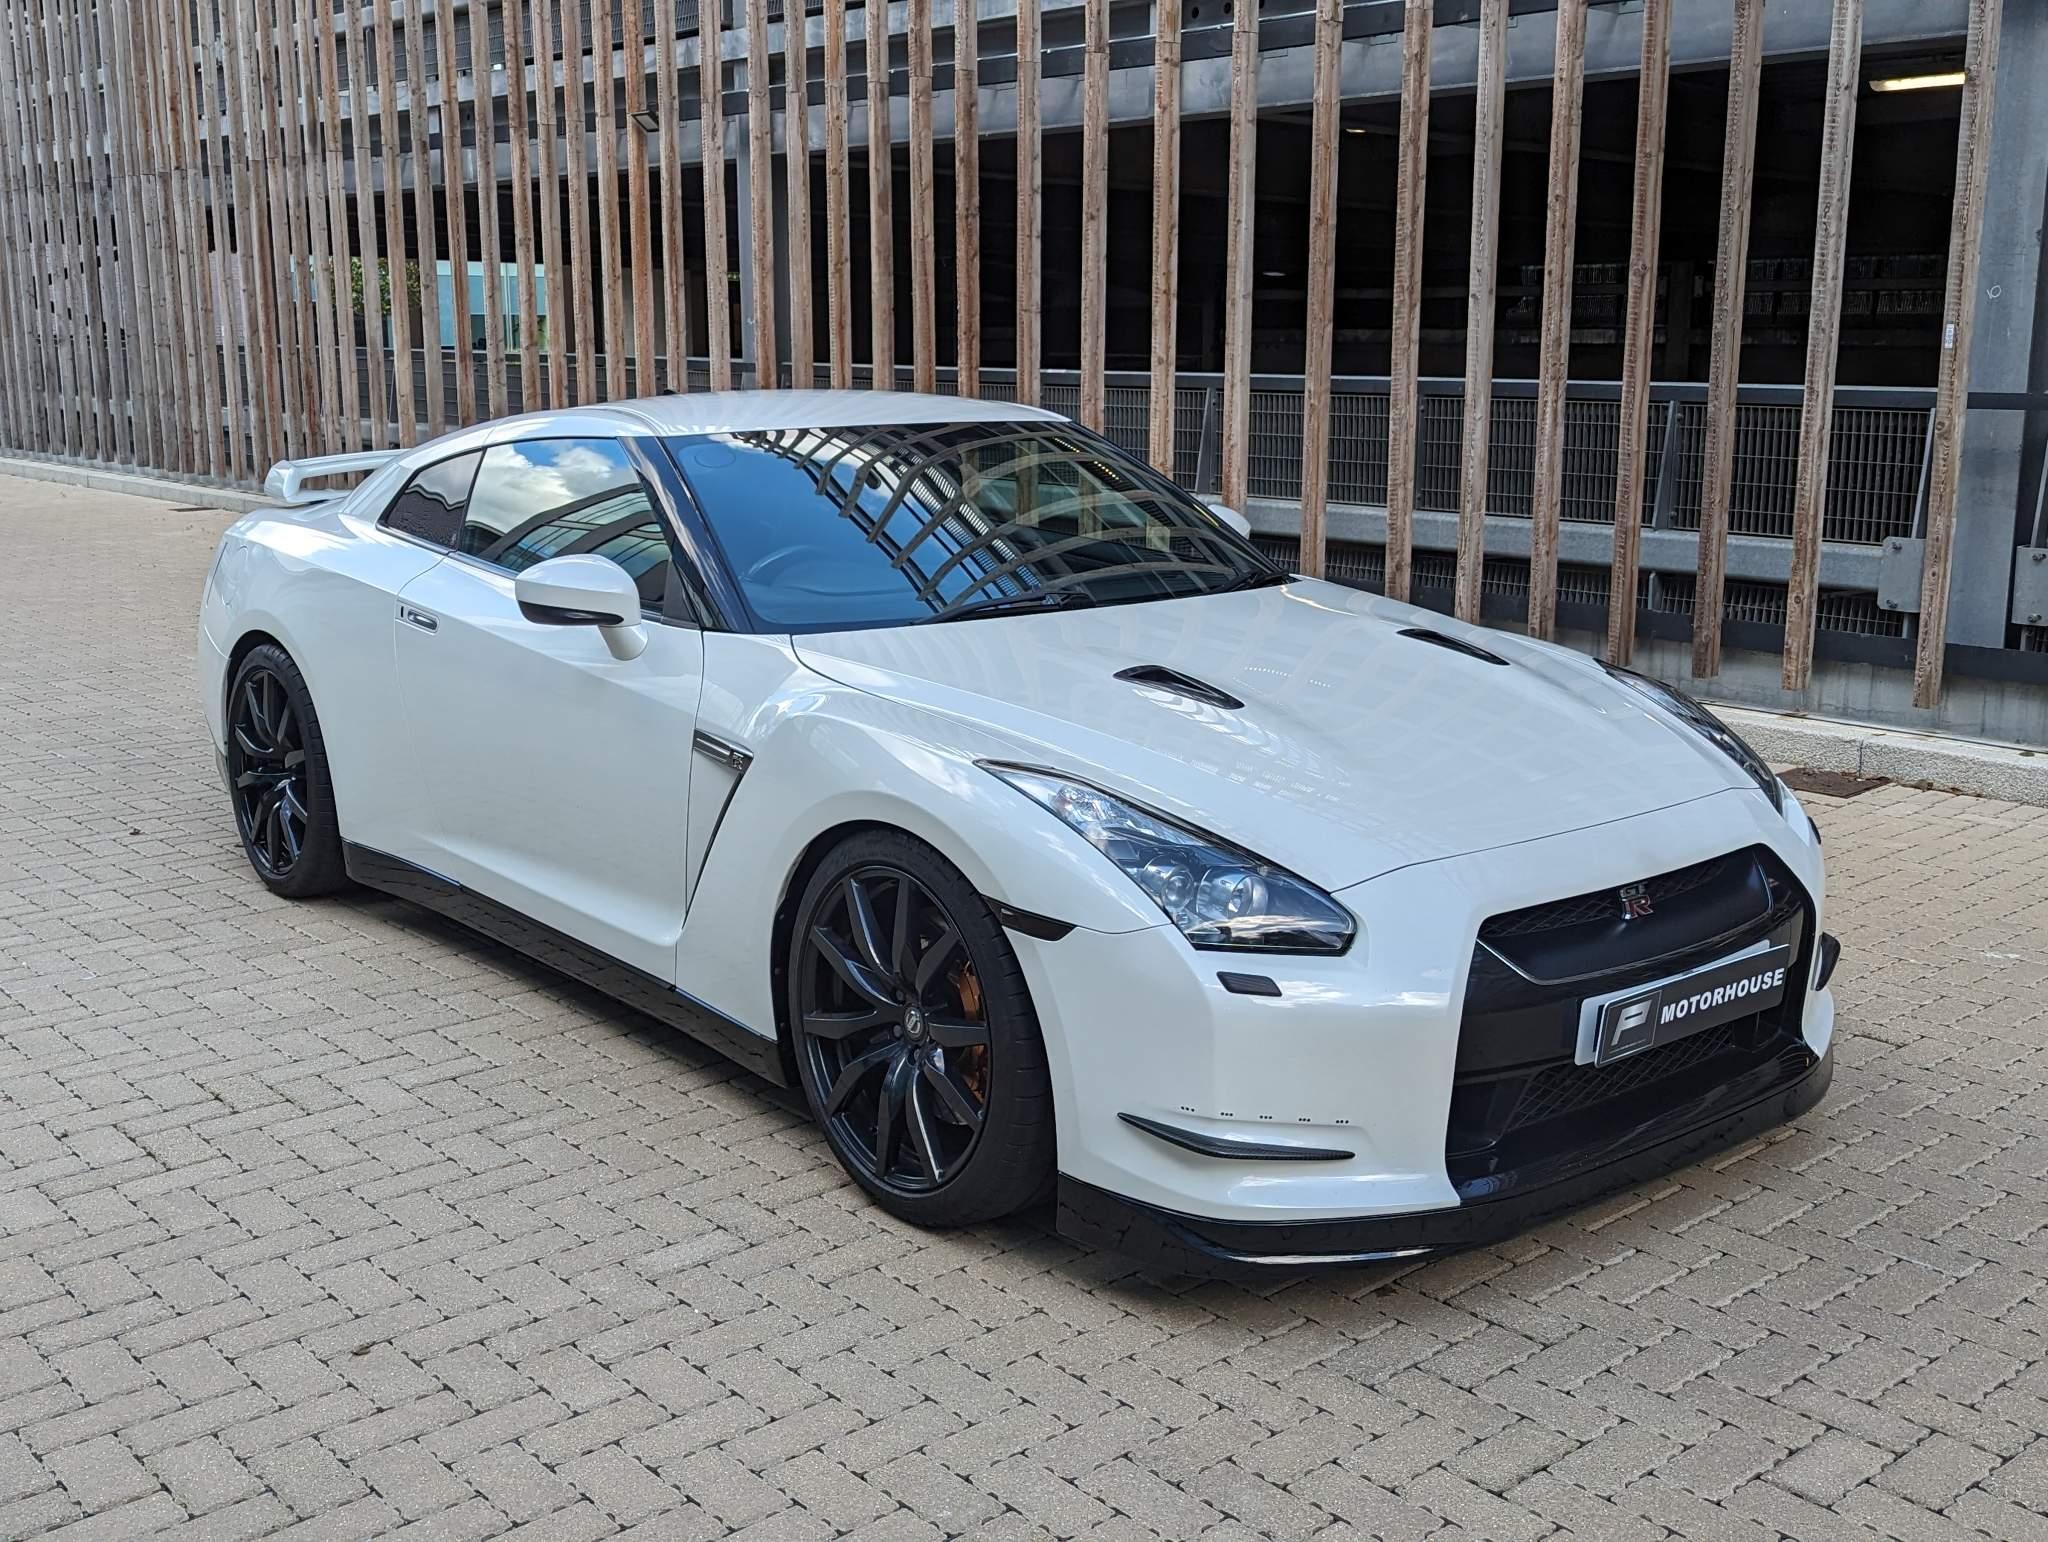 The Nissan GT-R is back on sale for 2023